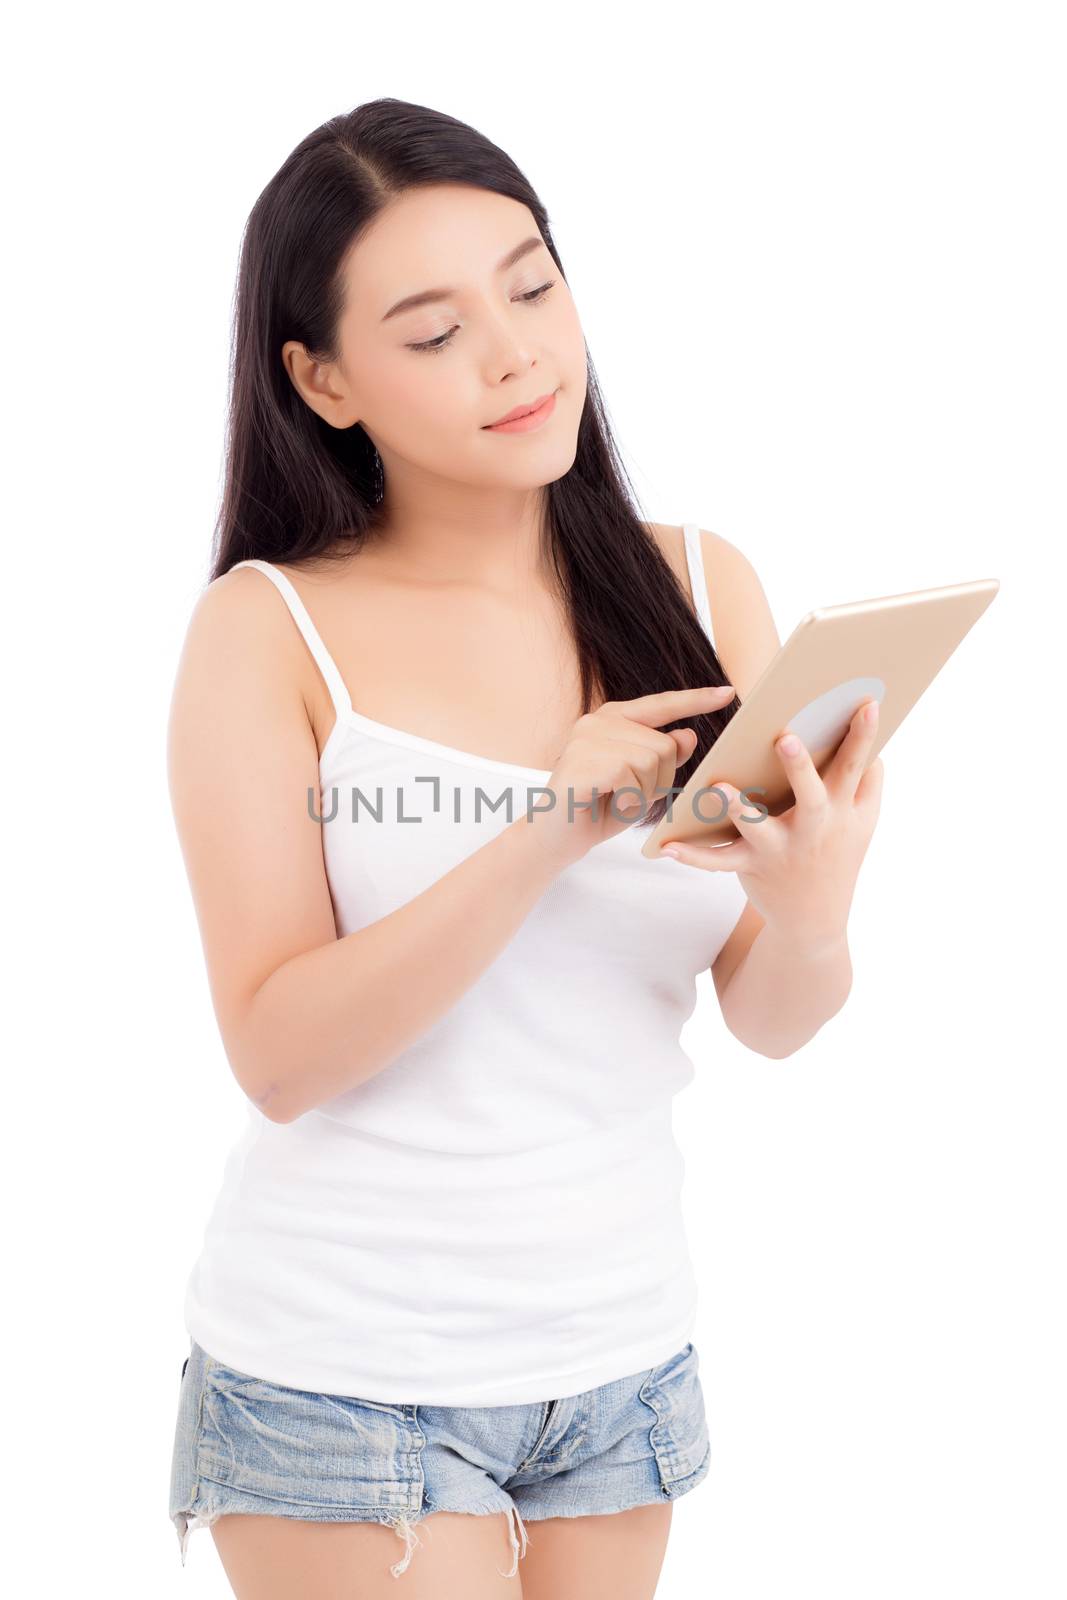 Portrait of asian young woman standing touch blank screen tablet isolated on white background, girl showing technology, business and communication concept.